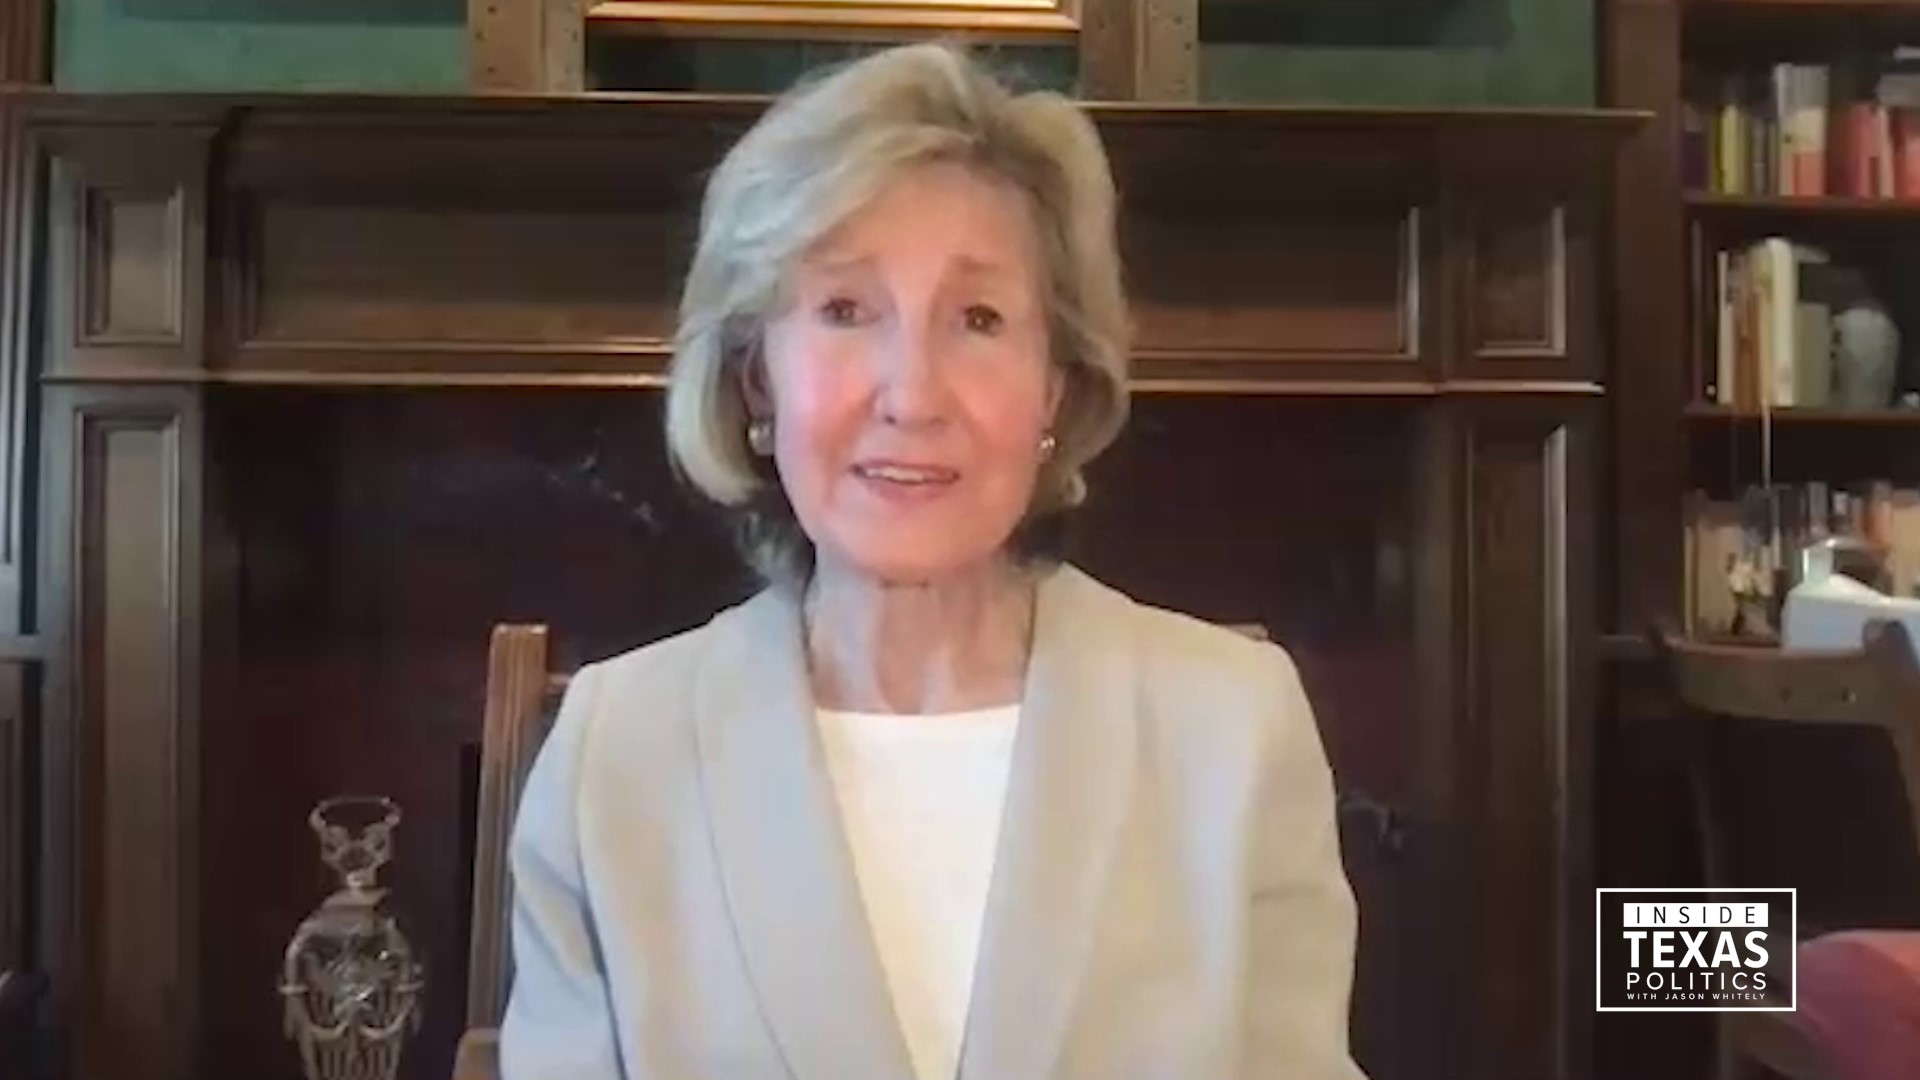 Former U.S. Senator Kay Bailey Hutchison says she’s disappointed Granger decided to leave after dedicating her life to public service.